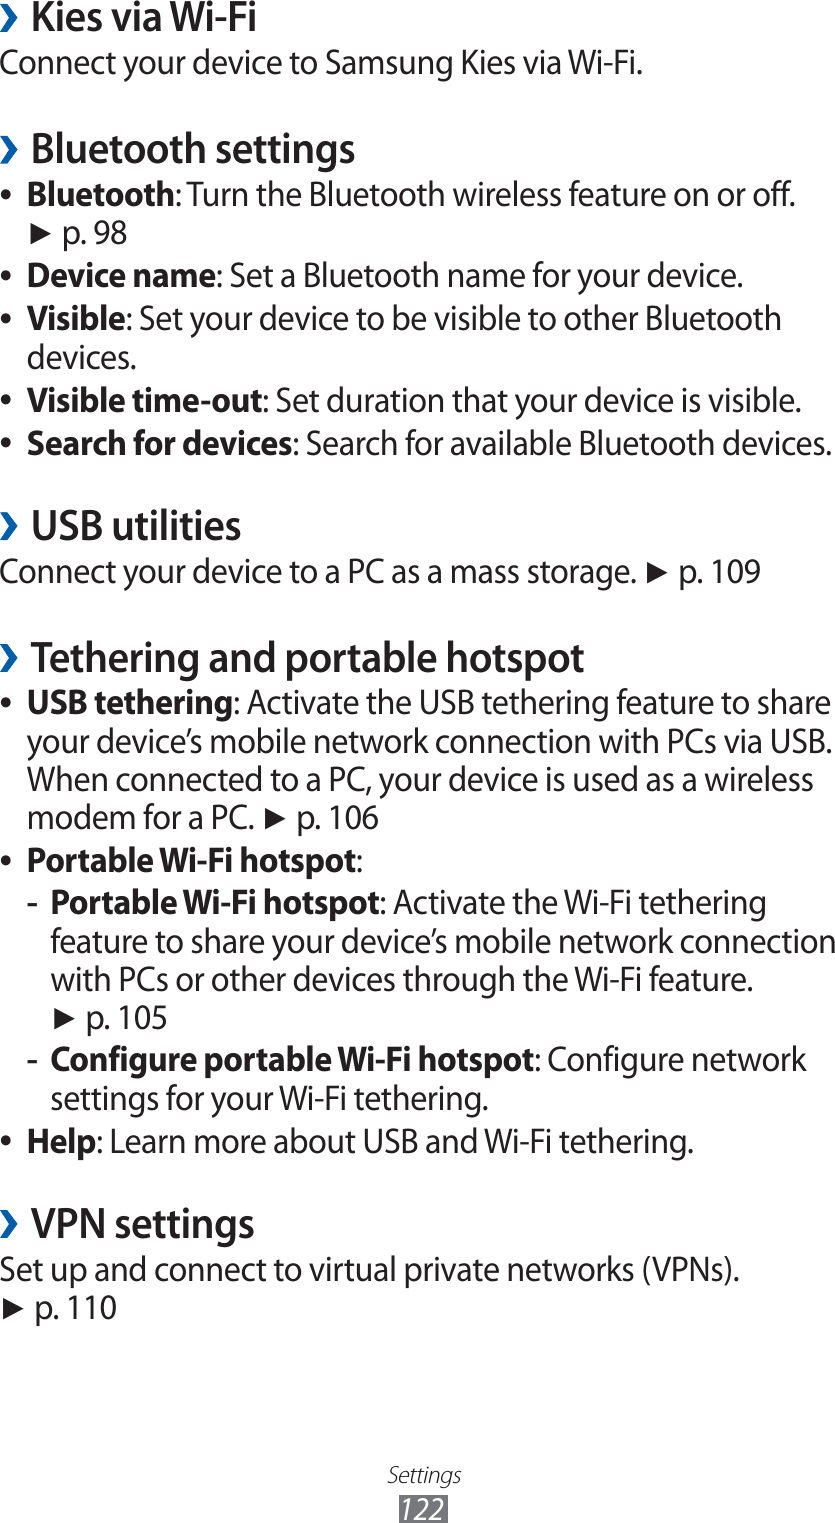 Settings122Kies via Wi-Fi ›Connect your device to Samsung Kies via Wi-Fi.Bluetooth settings ›Bluetooth ●: Turn the Bluetooth wireless feature on or off. ► p. 98Device name ●: Set a Bluetooth name for your device.Visible ●: Set your device to be visible to other Bluetooth devices.Visible time-out ●: Set duration that your device is visible.Search for devices ●: Search for available Bluetooth devices.USB utilities ›Connect your device to a PC as a mass storage. ► p. 109Tethering and portable hotspot ›USB tethering ●: Activate the USB tethering feature to share your device’s mobile network connection with PCs via USB. When connected to a PC, your device is used as a wireless modem for a PC. ► p. 106Portable Wi-Fi hotspot ●:Portable Wi-Fi hotspot -: Activate the Wi-Fi tethering feature to share your device’s mobile network connection with PCs or other devices through the Wi-Fi feature. ► p. 105Configure portable Wi-Fi hotspot -: Configure network settings for your Wi-Fi tethering.Help ●: Learn more about USB and Wi-Fi tethering.VPN settings ›Set up and connect to virtual private networks (VPNs). ► p. 110